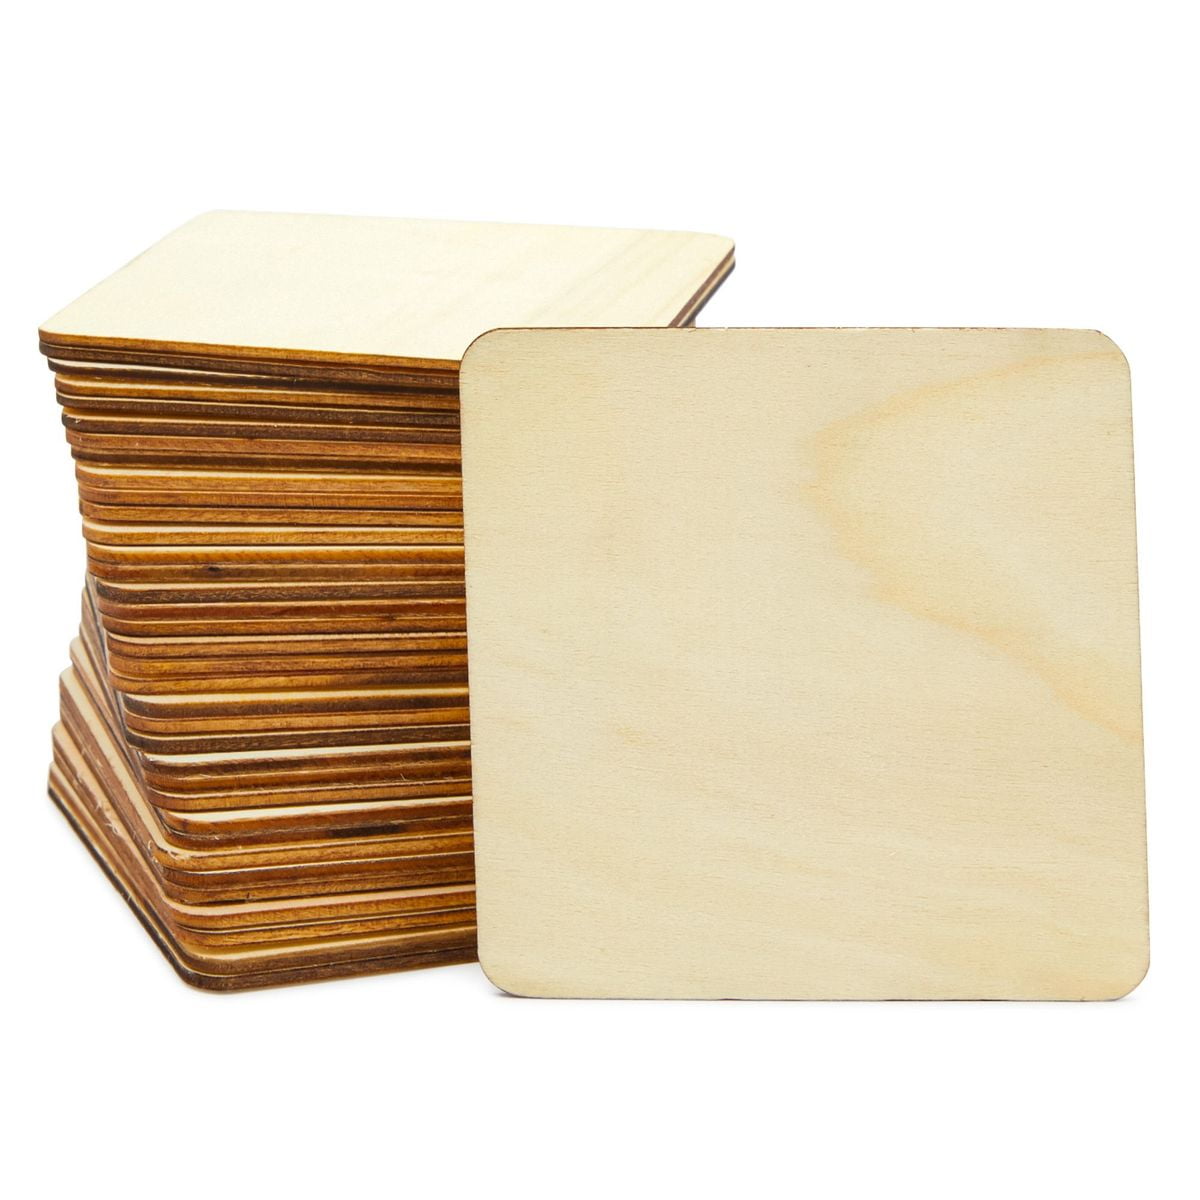 DIY Supplies Blank Wood Pieces Writing Blank Wood Signs for Painting Engraving 12 Pieces 4 Inch Unfinished Wood Plaques with Sanding Sponge Square Wood Drink Coasters Home Decorations